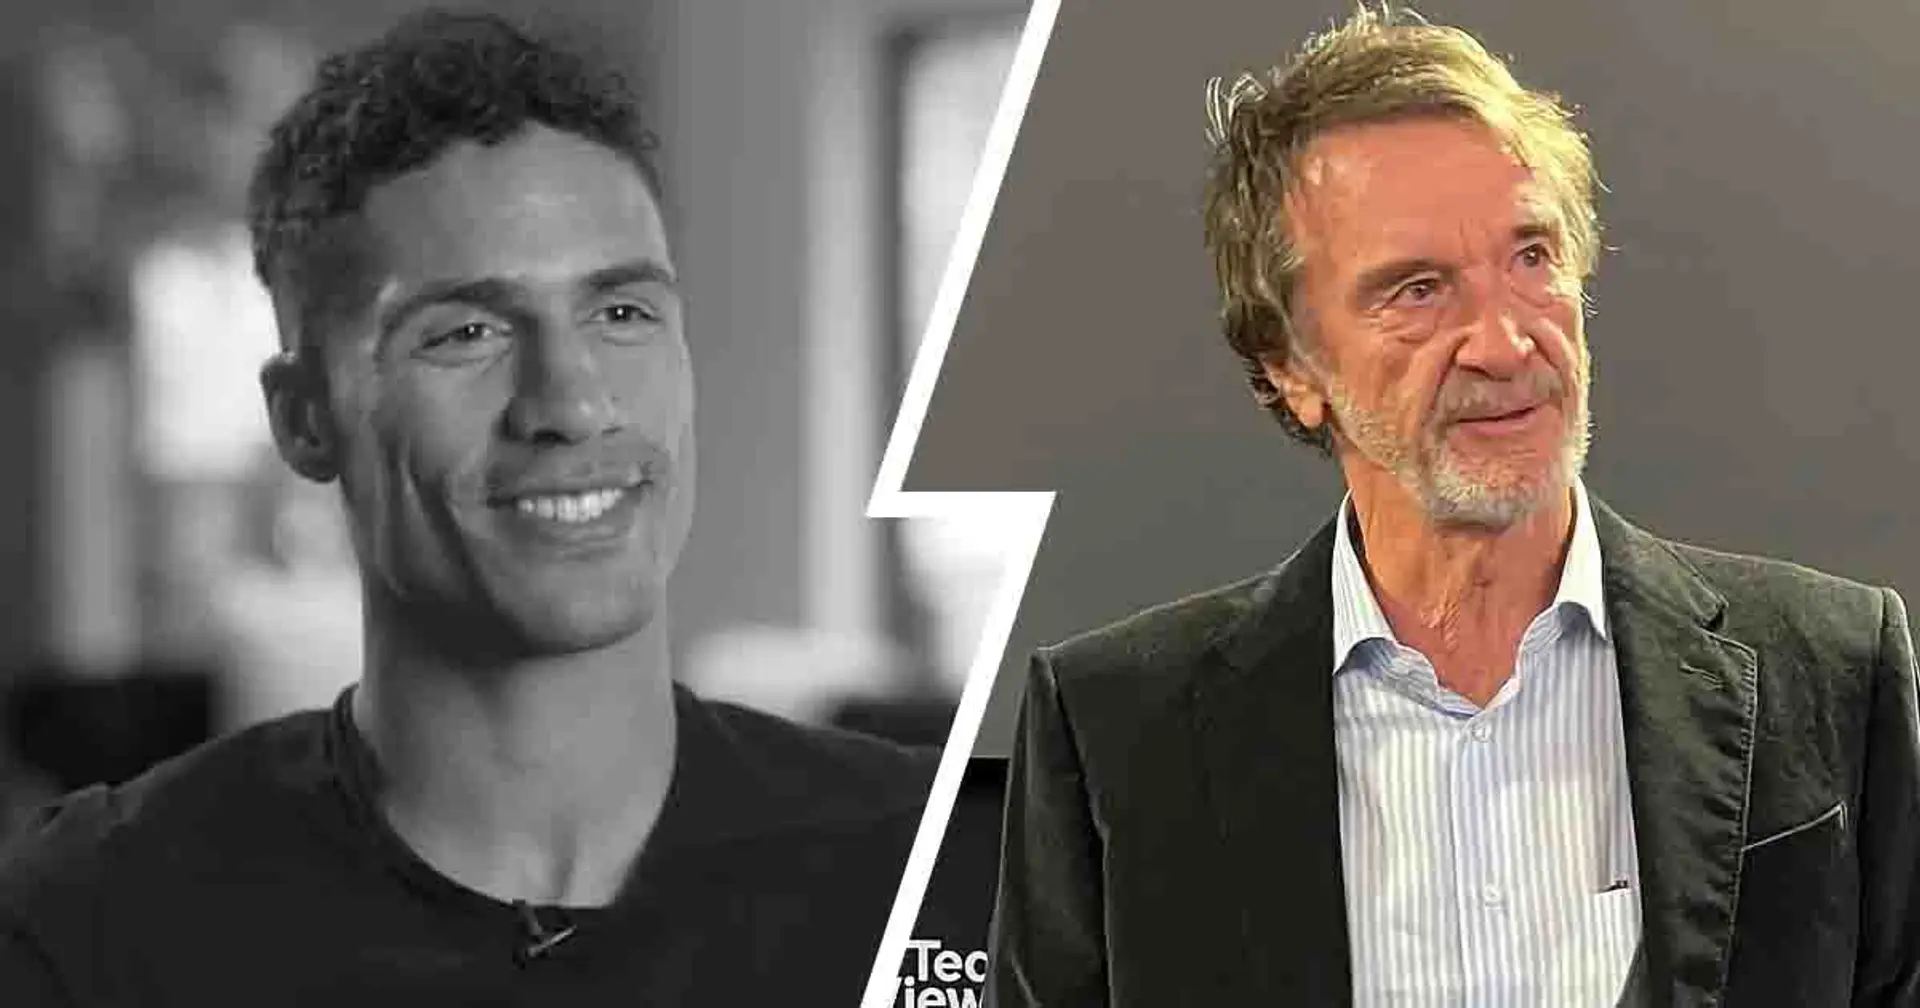 'I am positive for the future': Varane mentions Sir JIm Ratcliffe in emotional farewell note to Man United fans